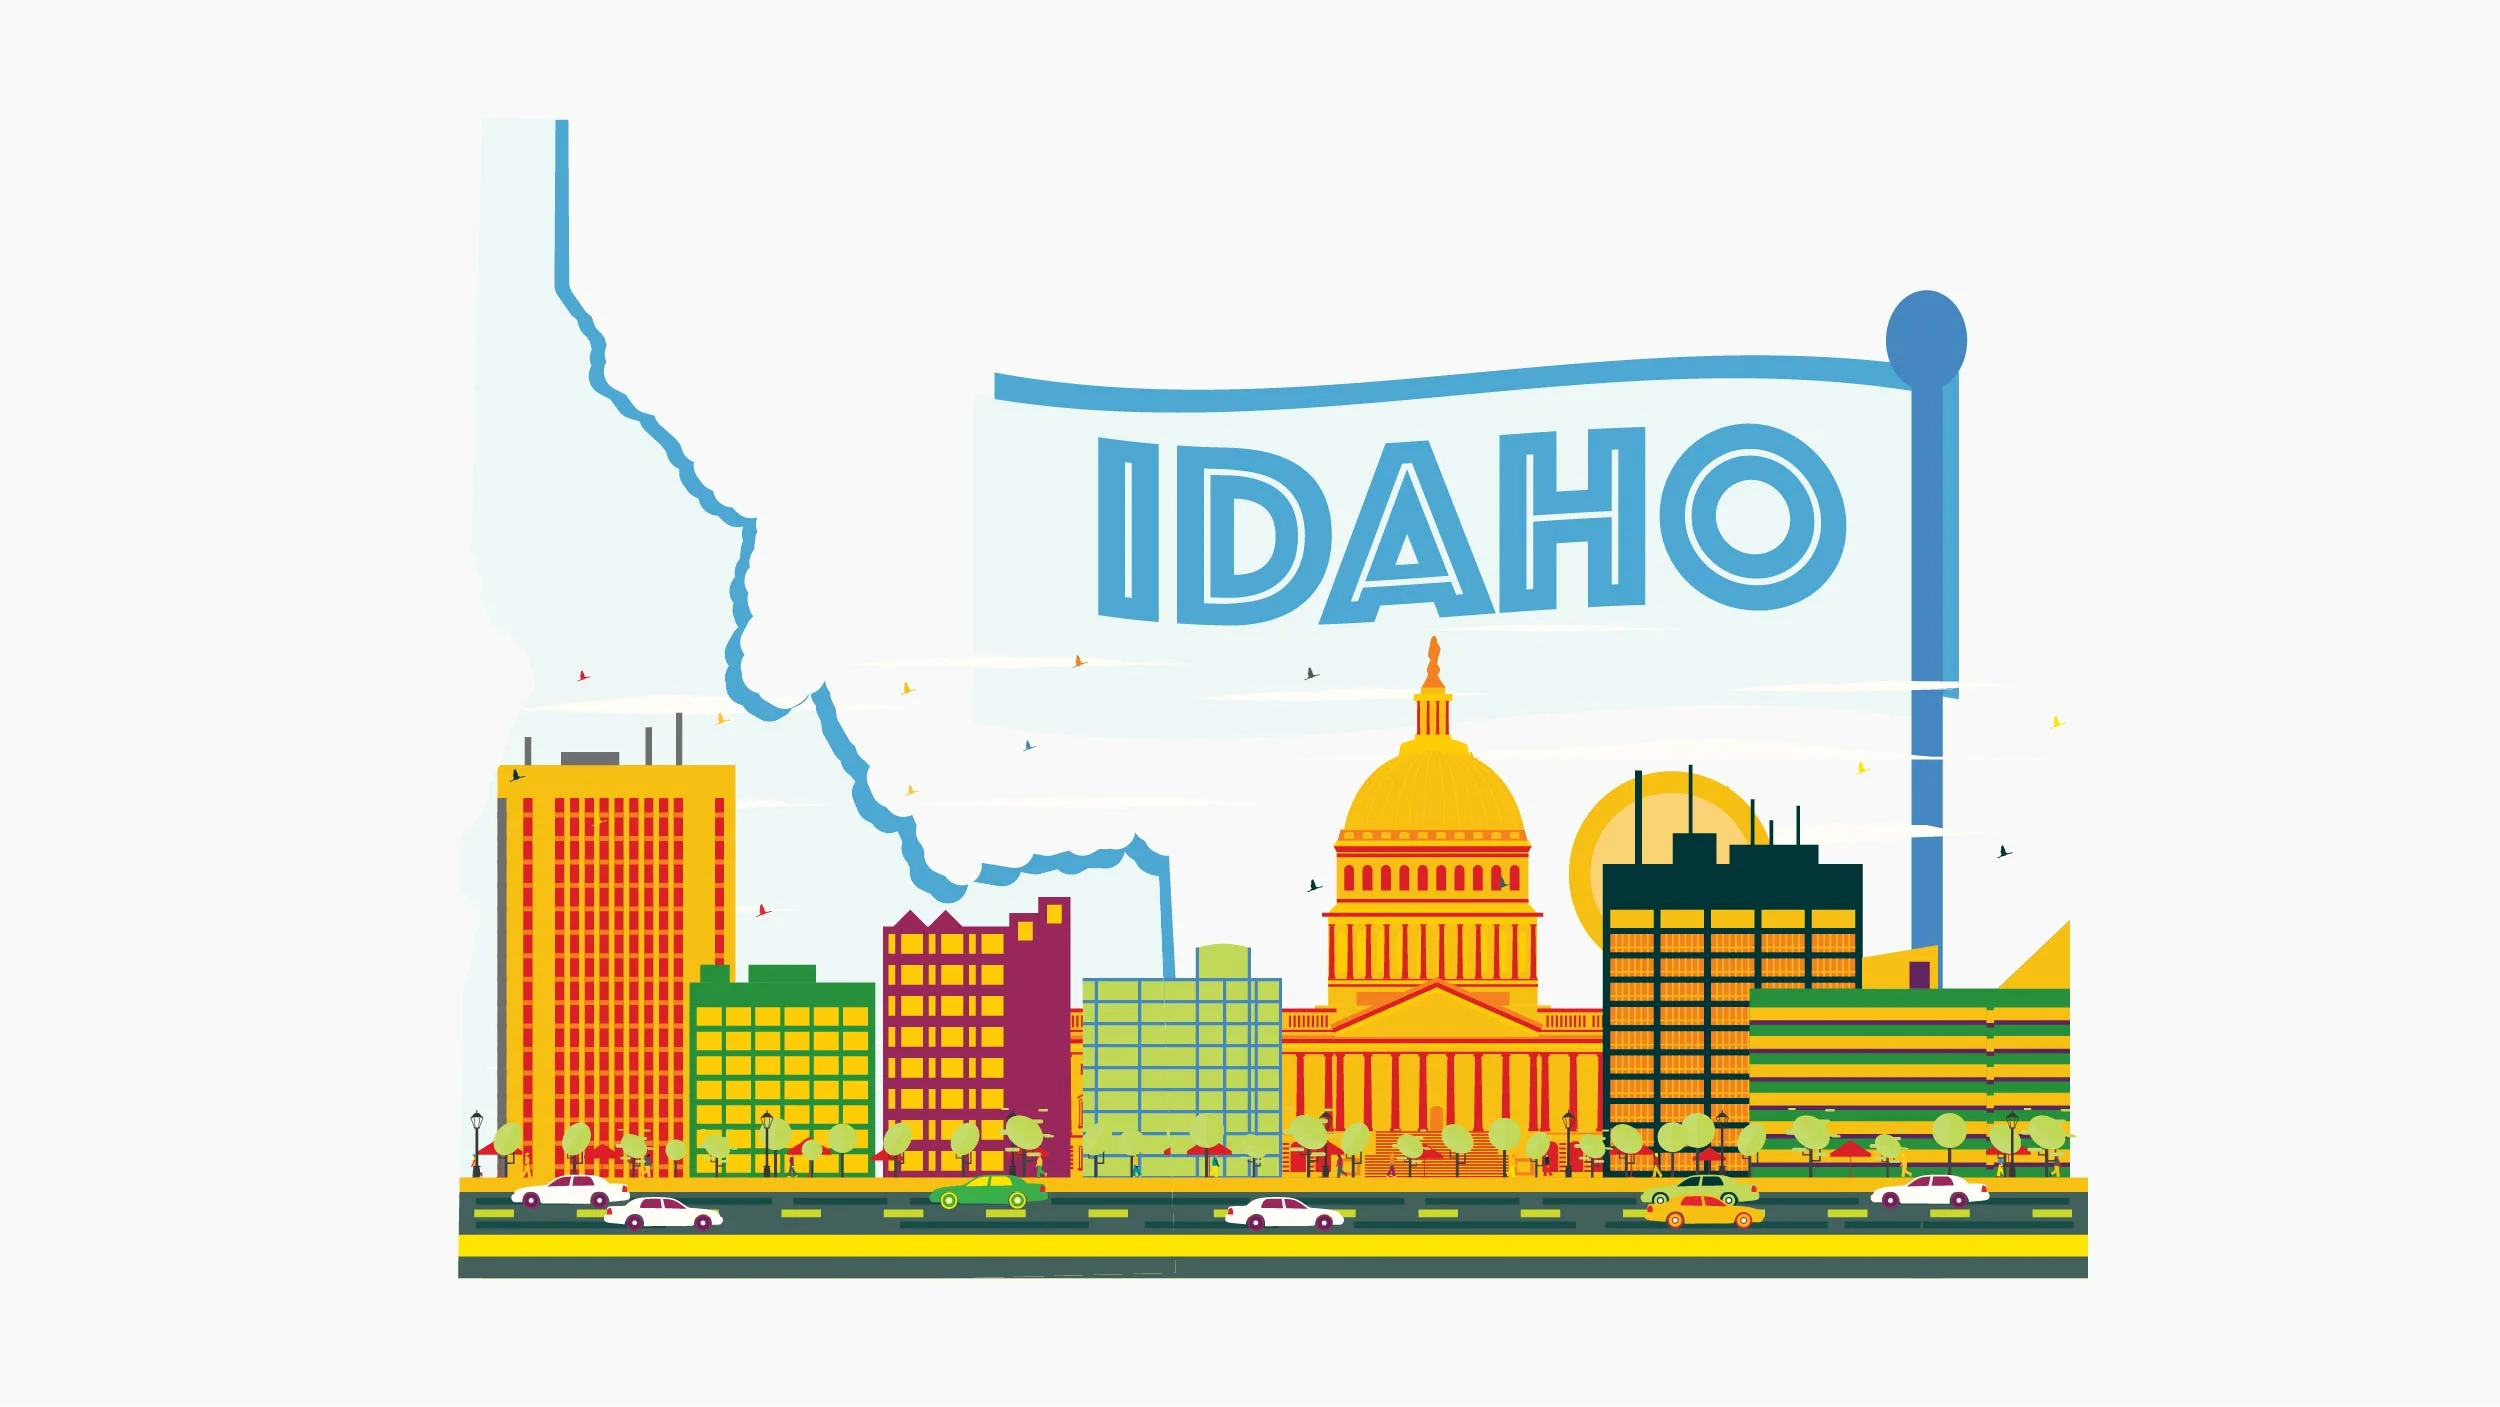 Illustration of Idaho state and city in white background